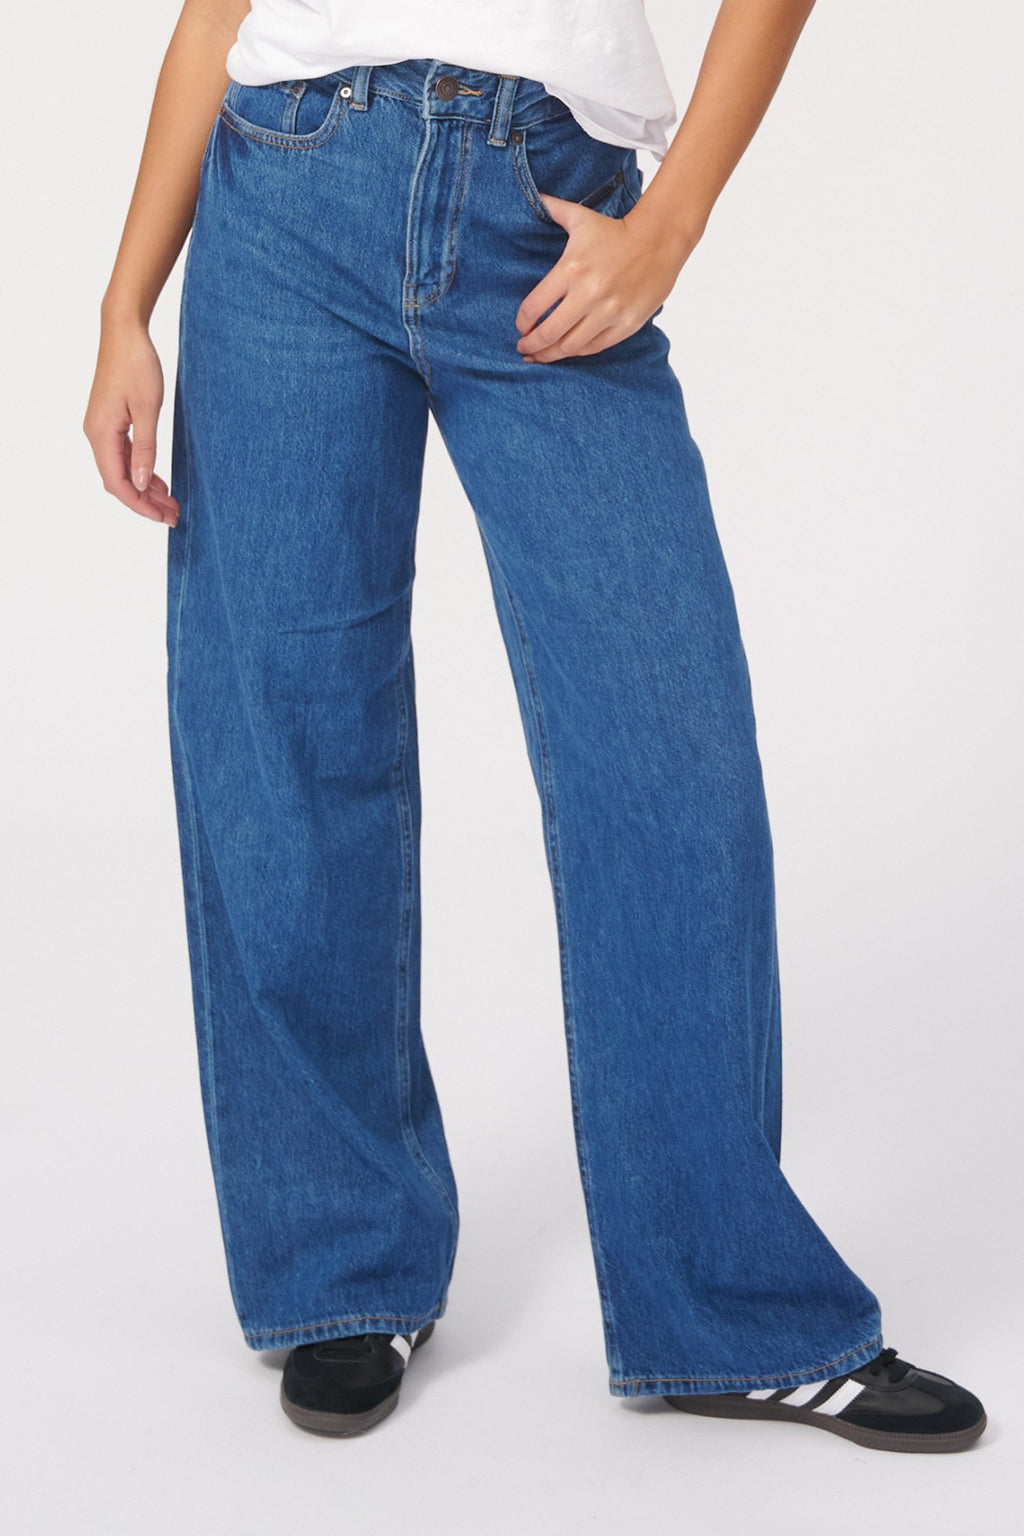 The Original Performance Wide Jeans - Package Deal (3 pcs.)